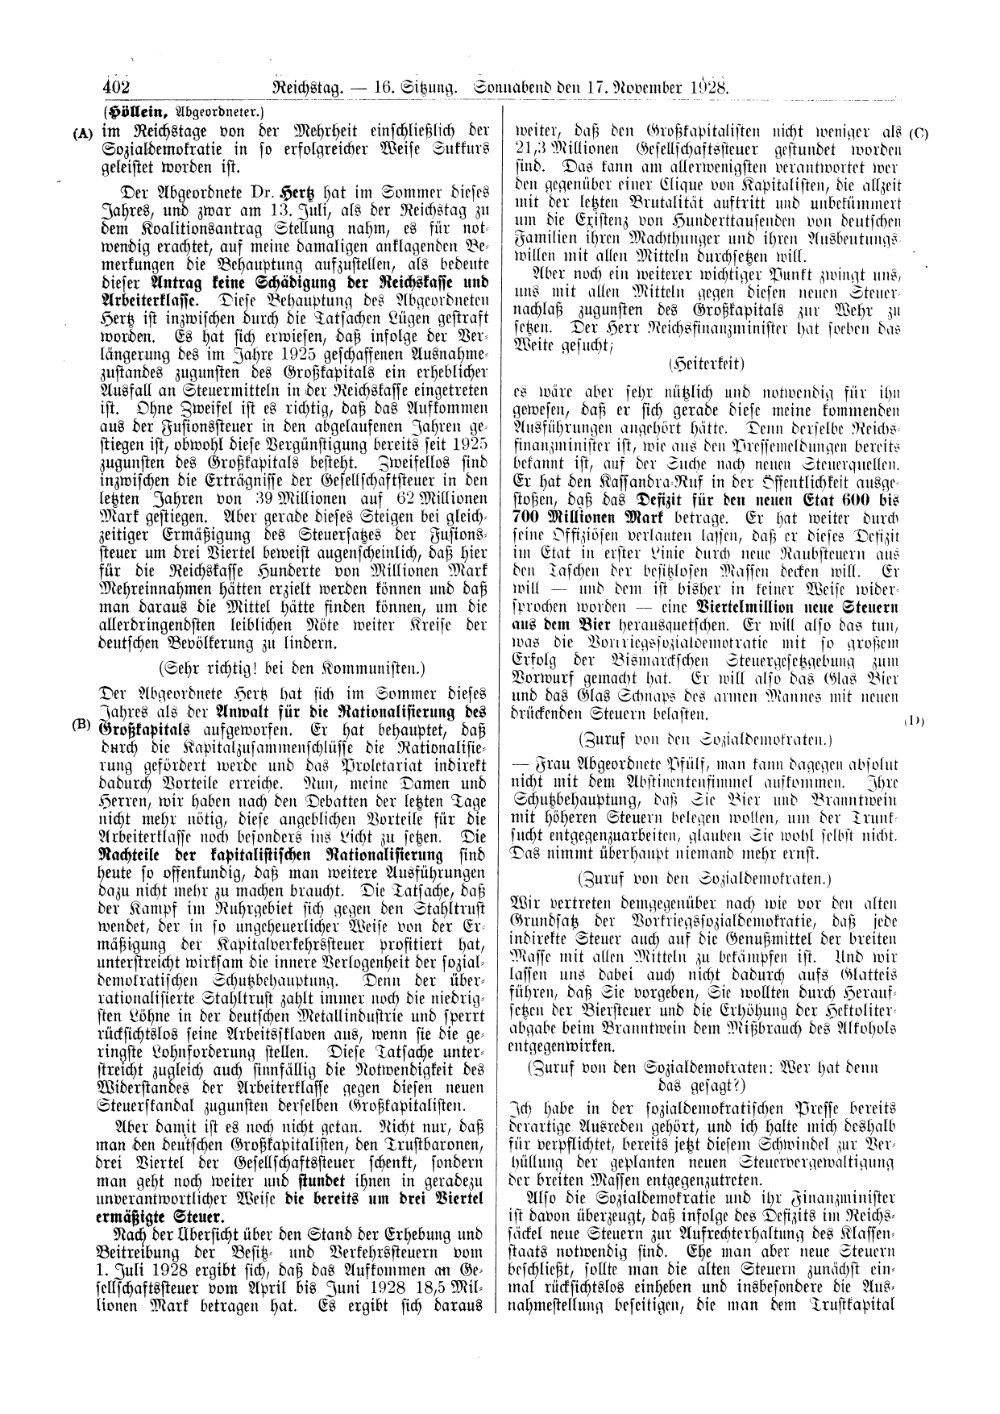 Scan of page 402